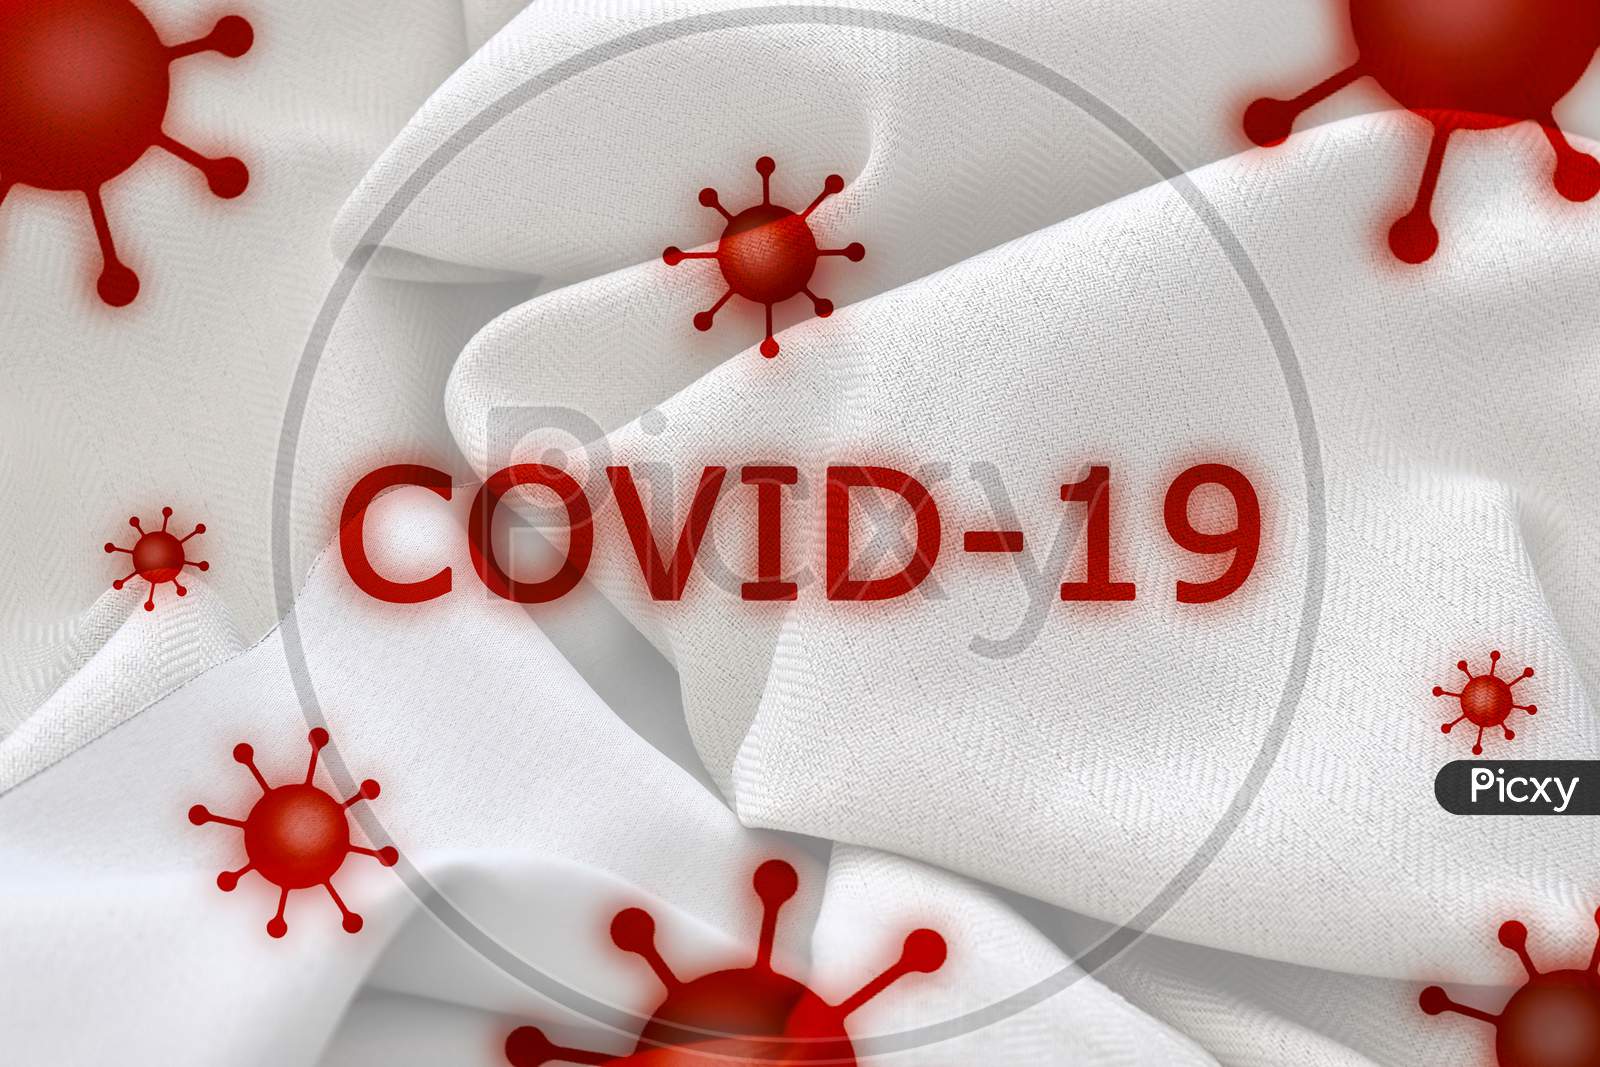 Illustration of COVID-19 and coronavirus texts on a white background